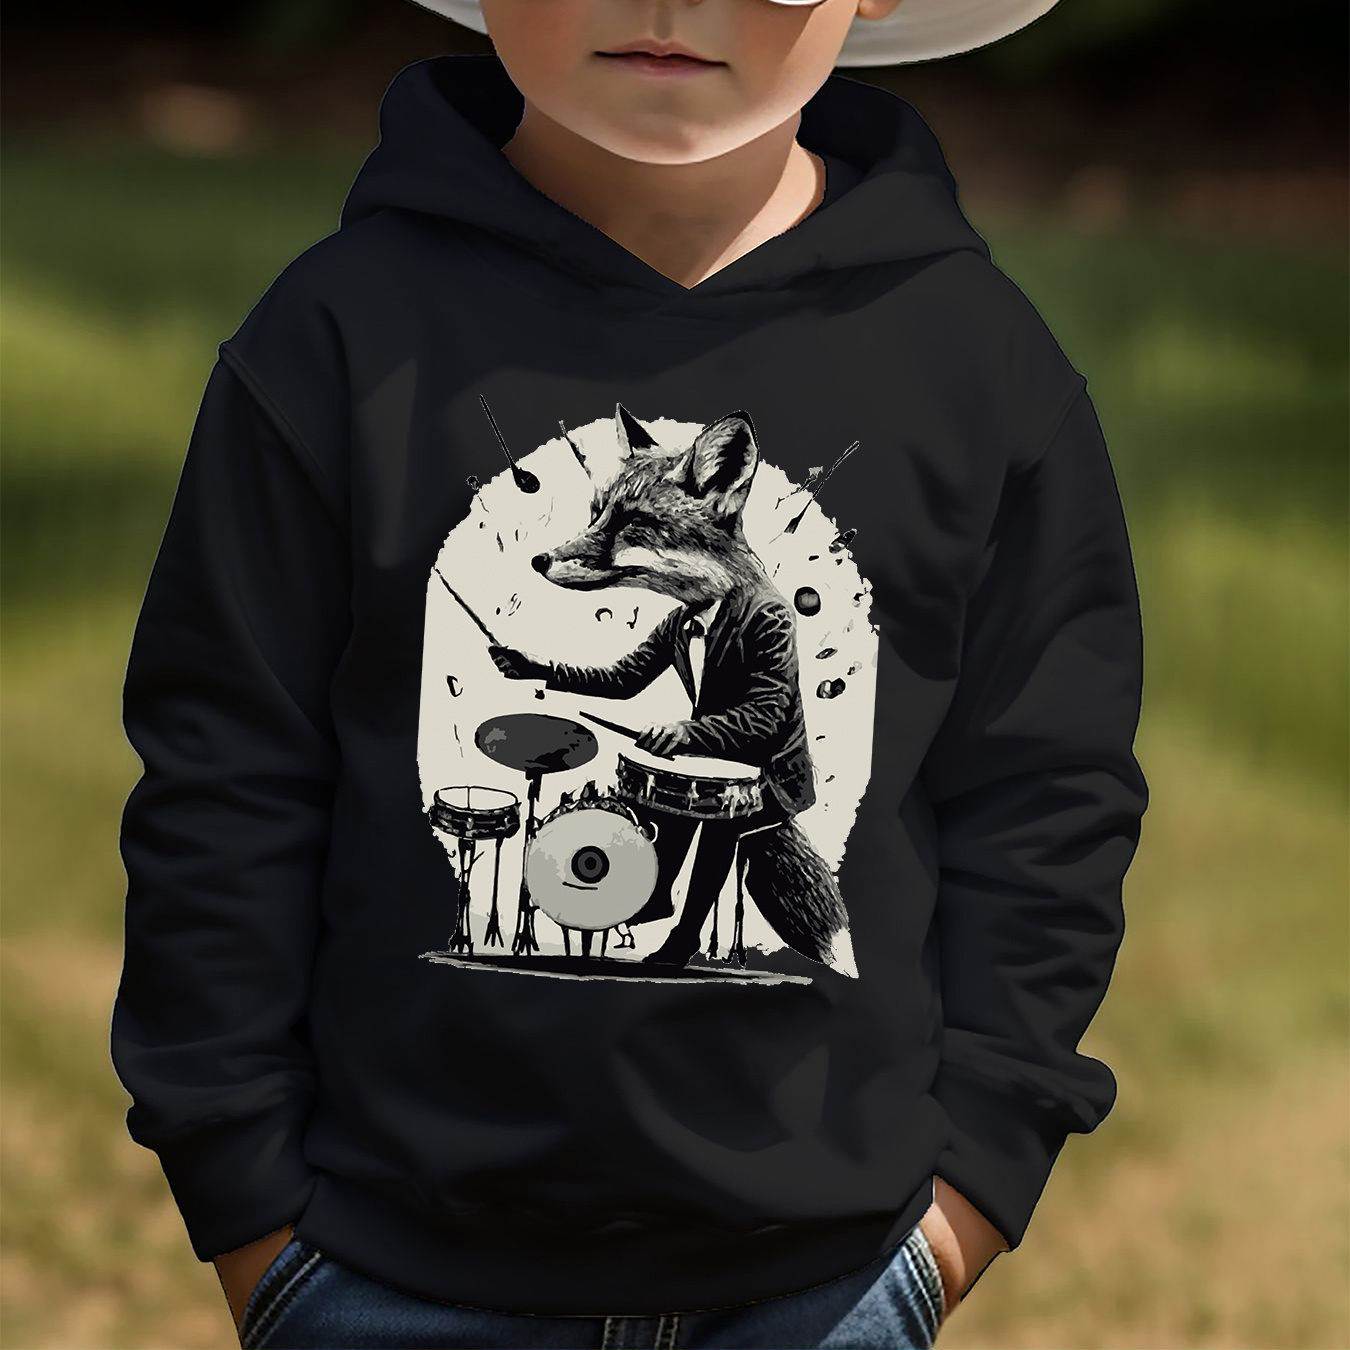 

Anime Fox And Drums Print Boys Casual Pullover Long Sleeve Hoodies, Boys Sweatshirt For Spring Fall, Kids Hoodie Tops Outdoor